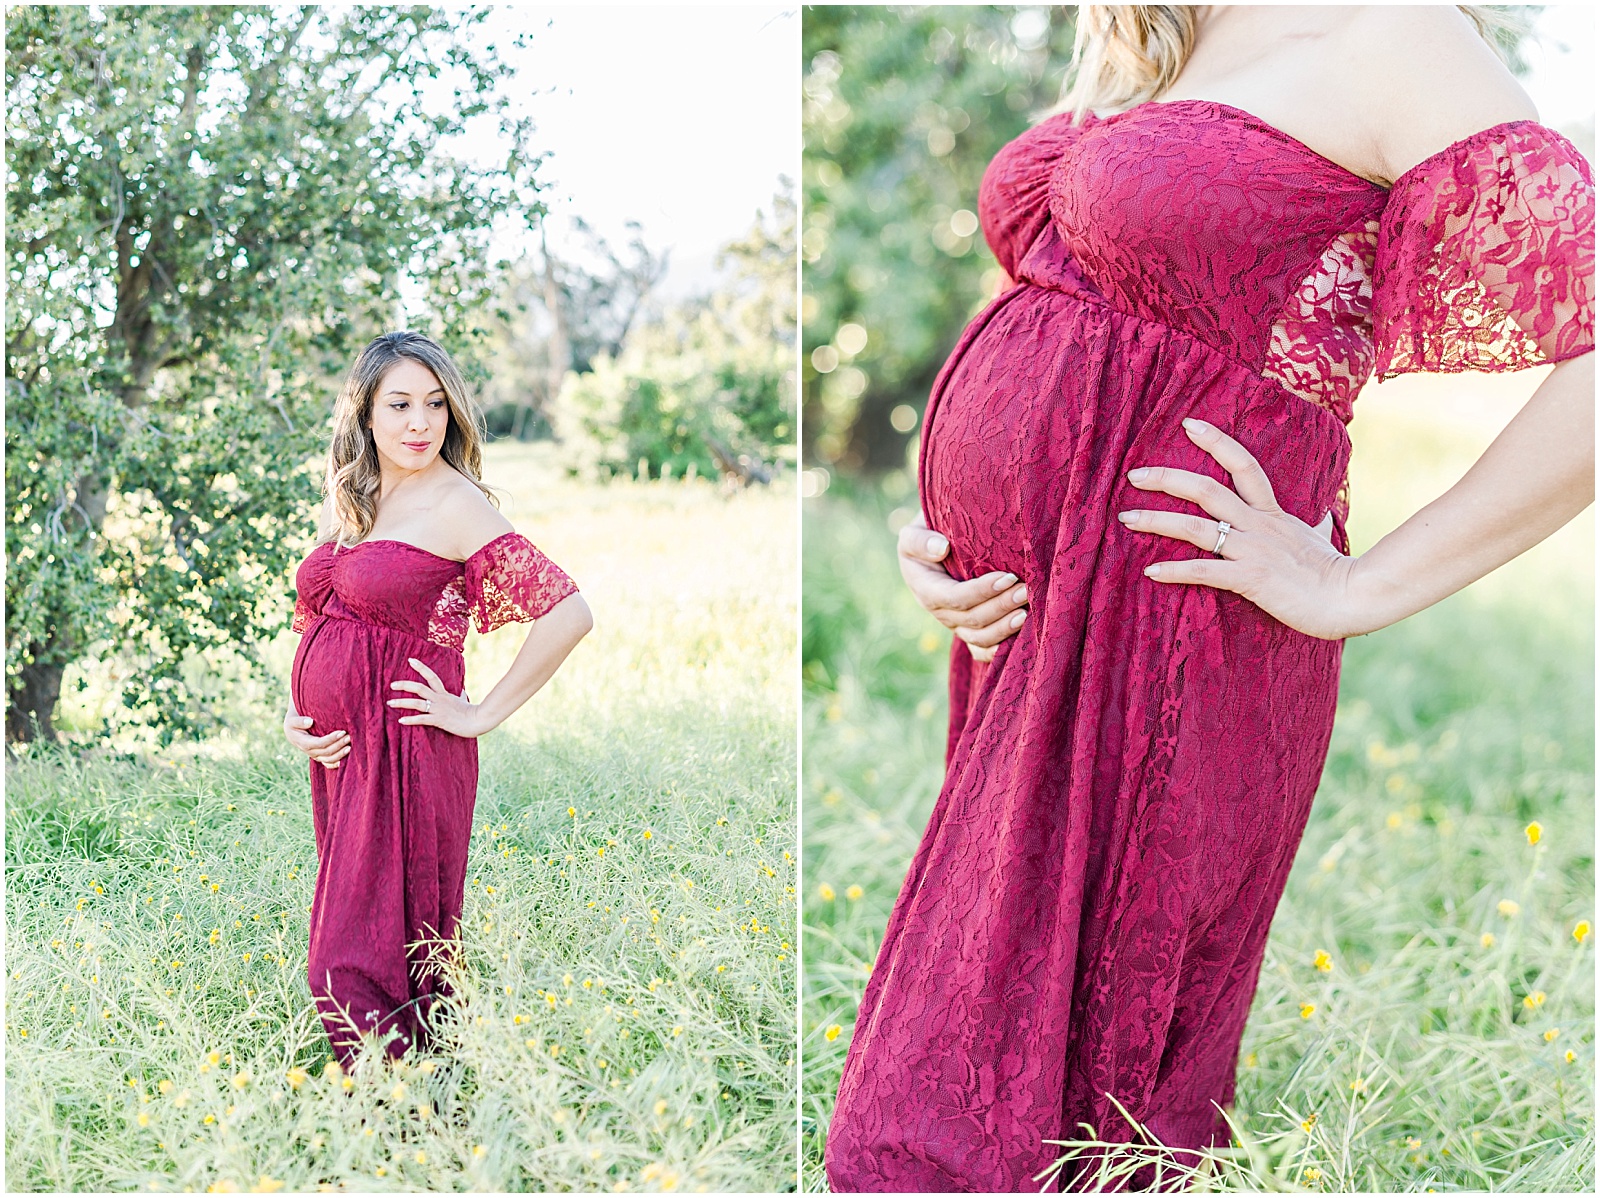 Rancho Cucamonga Maternity Session by Mollie Jane Photography. To see more go to www.molliejanephotography.com